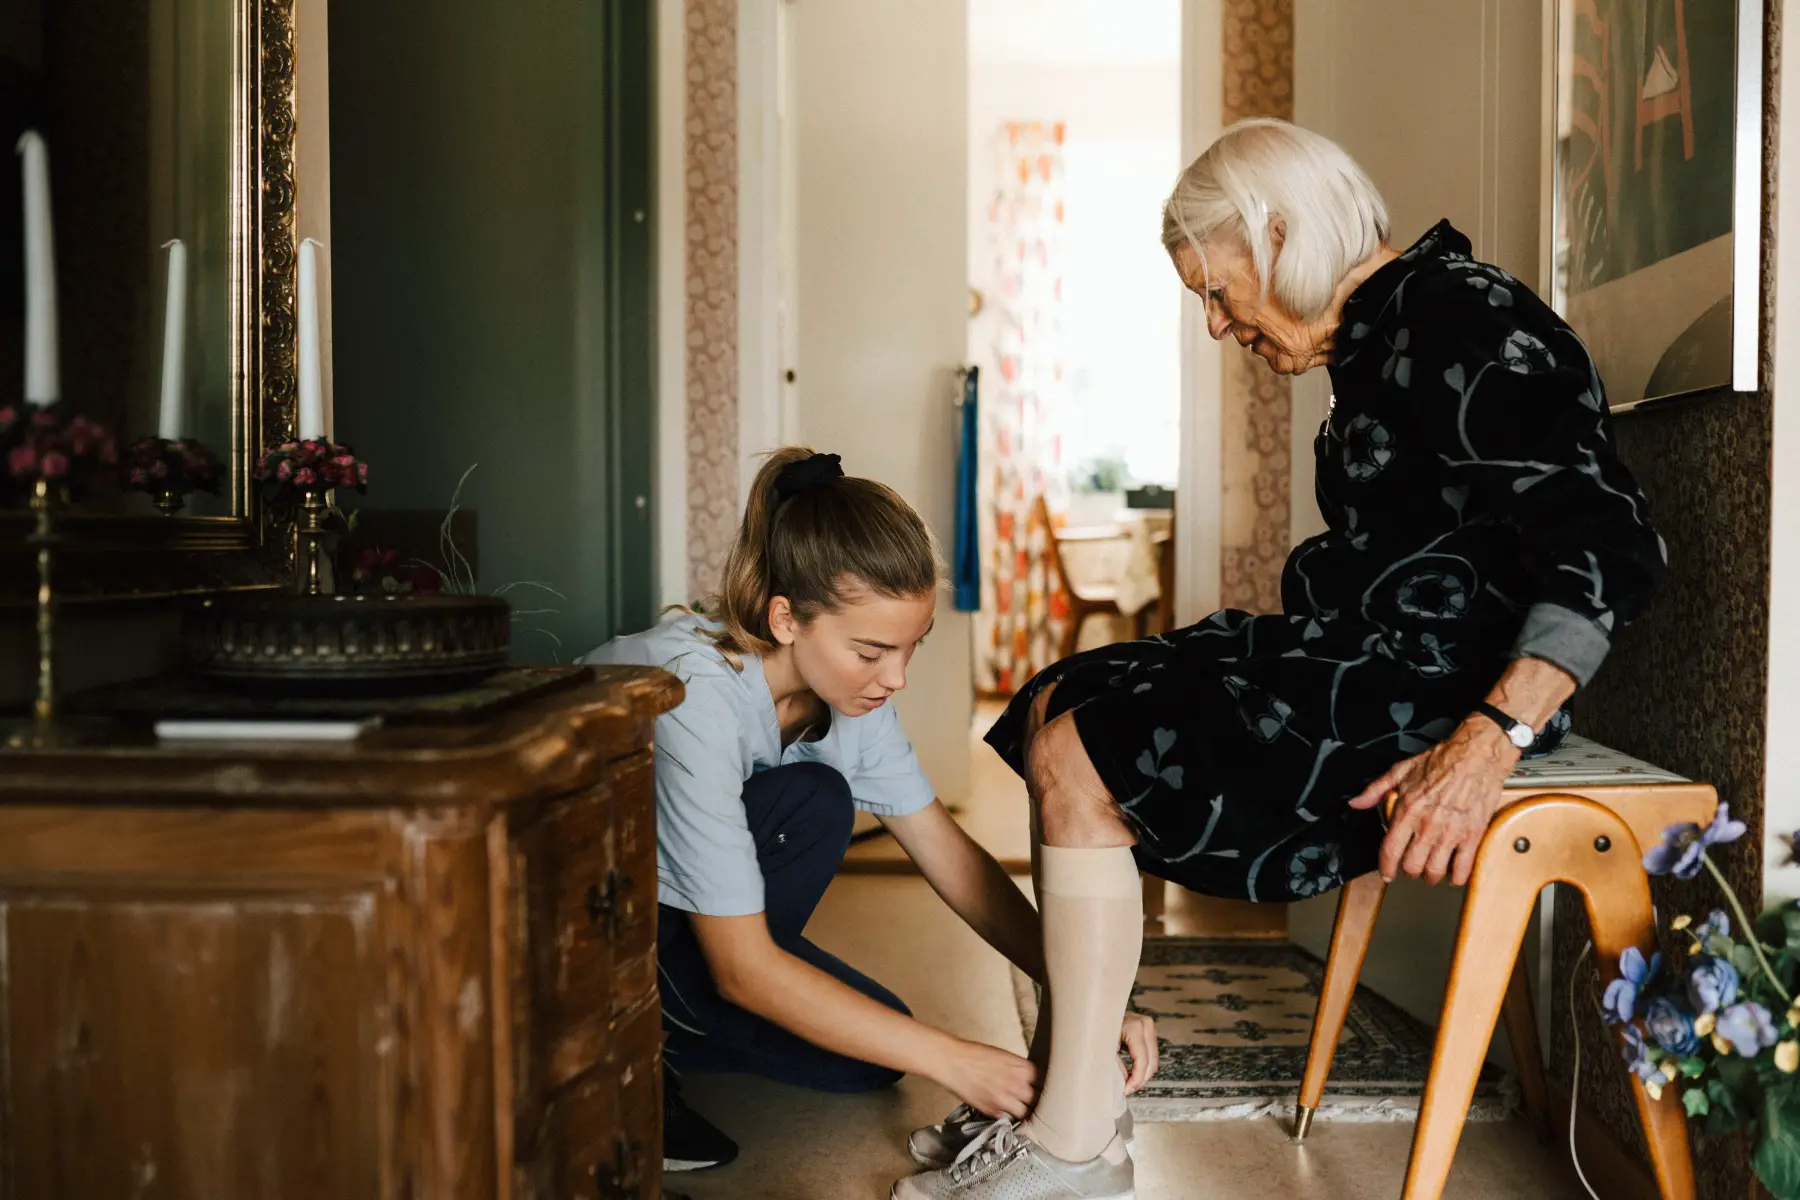 Carer helping pensioner put on shoe in her house